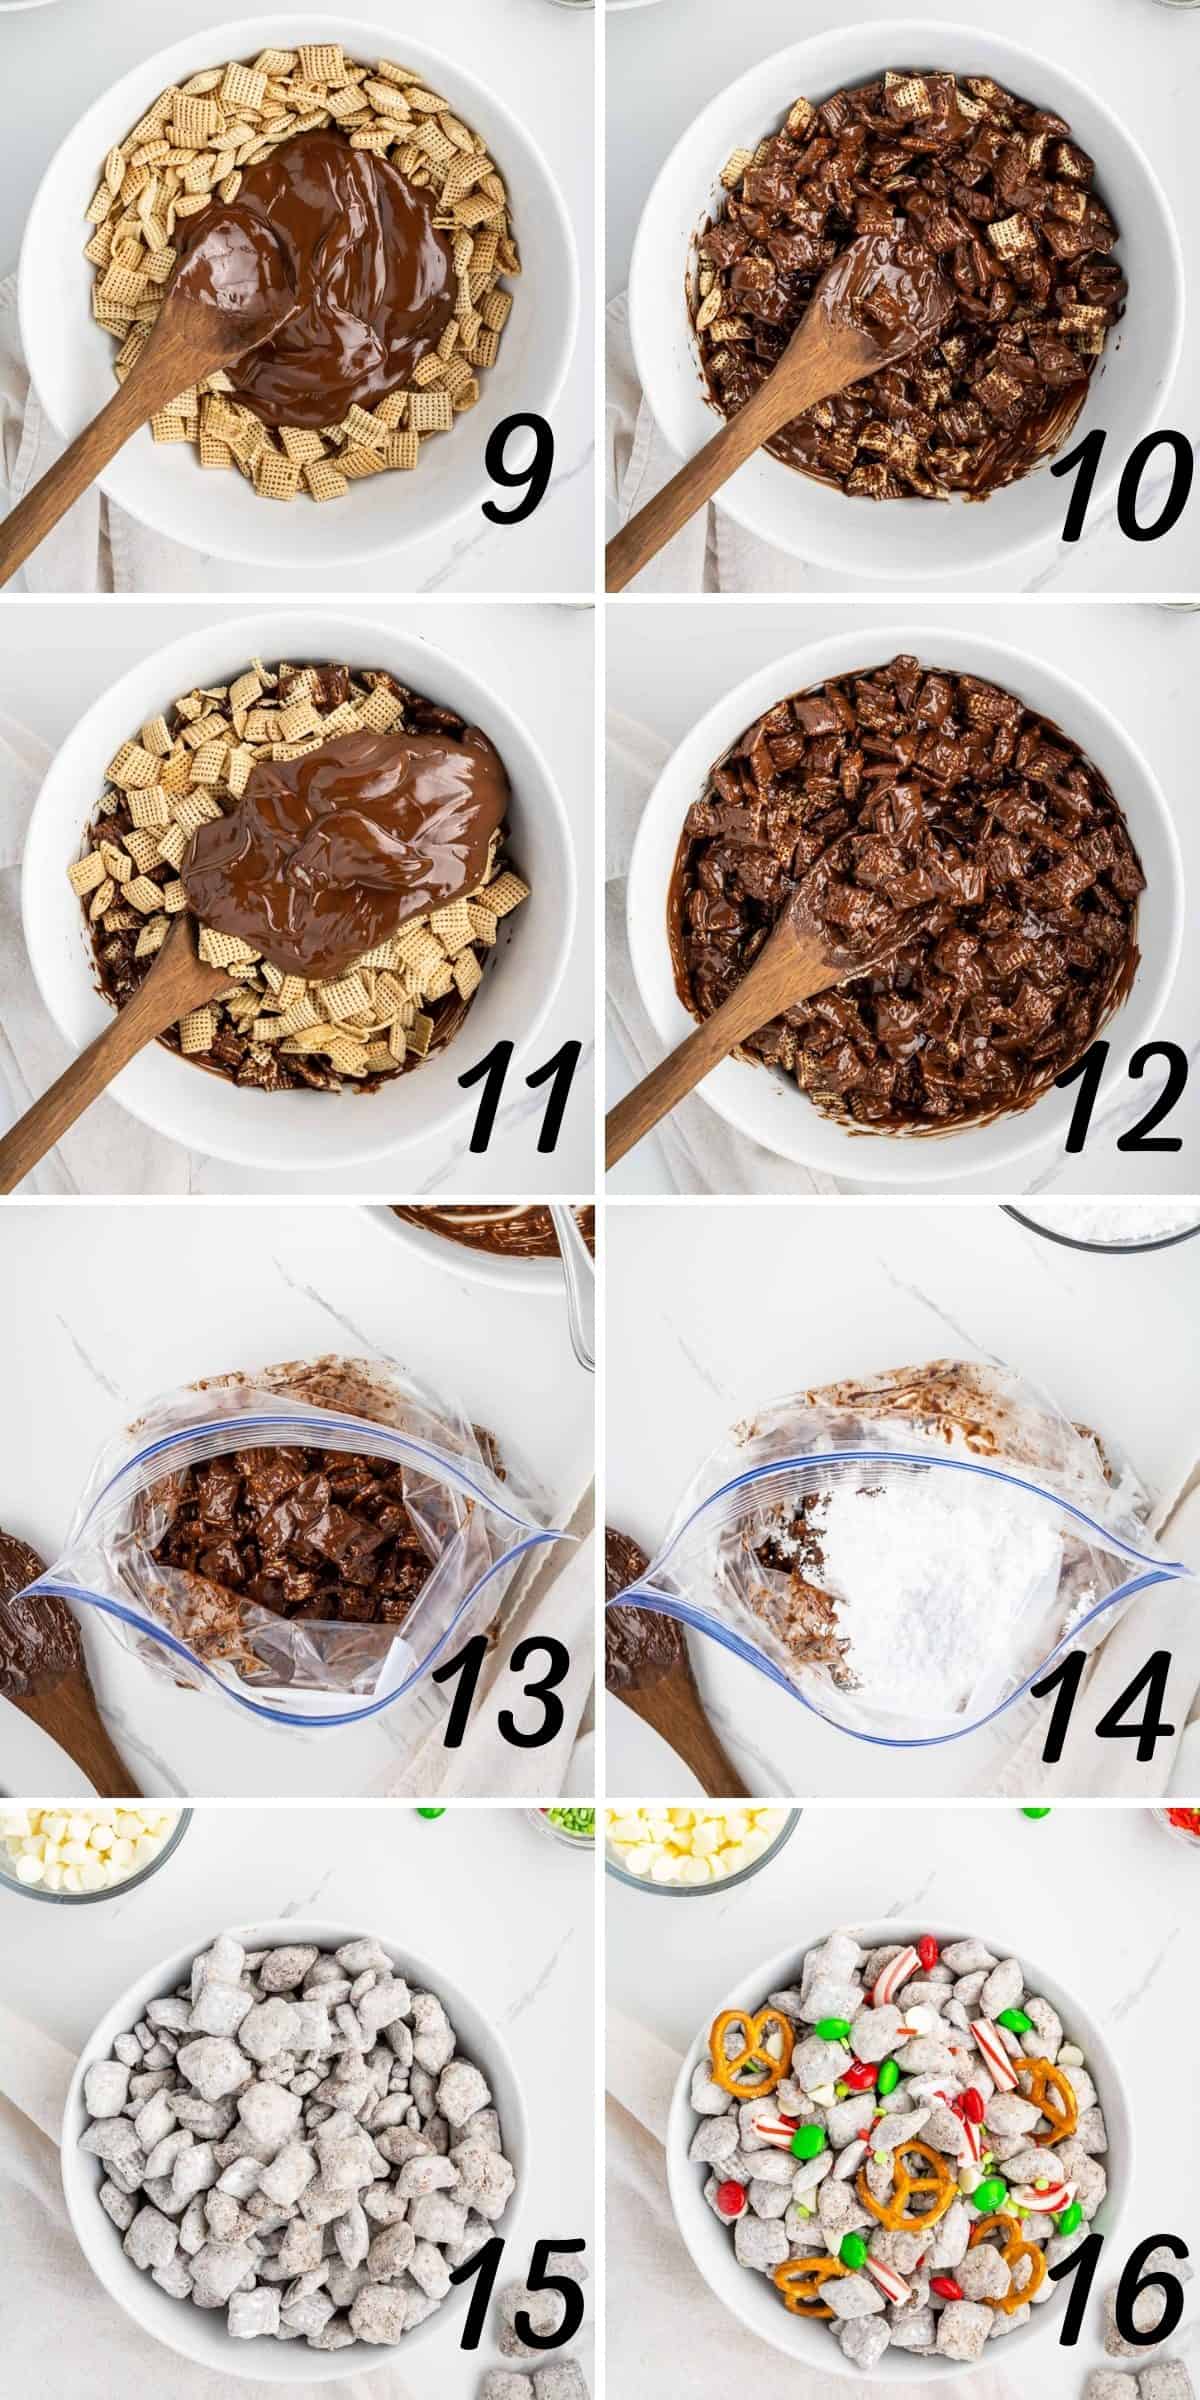 Collage image showing steps to add melted chocolate to chex cereal and then to toss in powdered sugar and add in toppings.